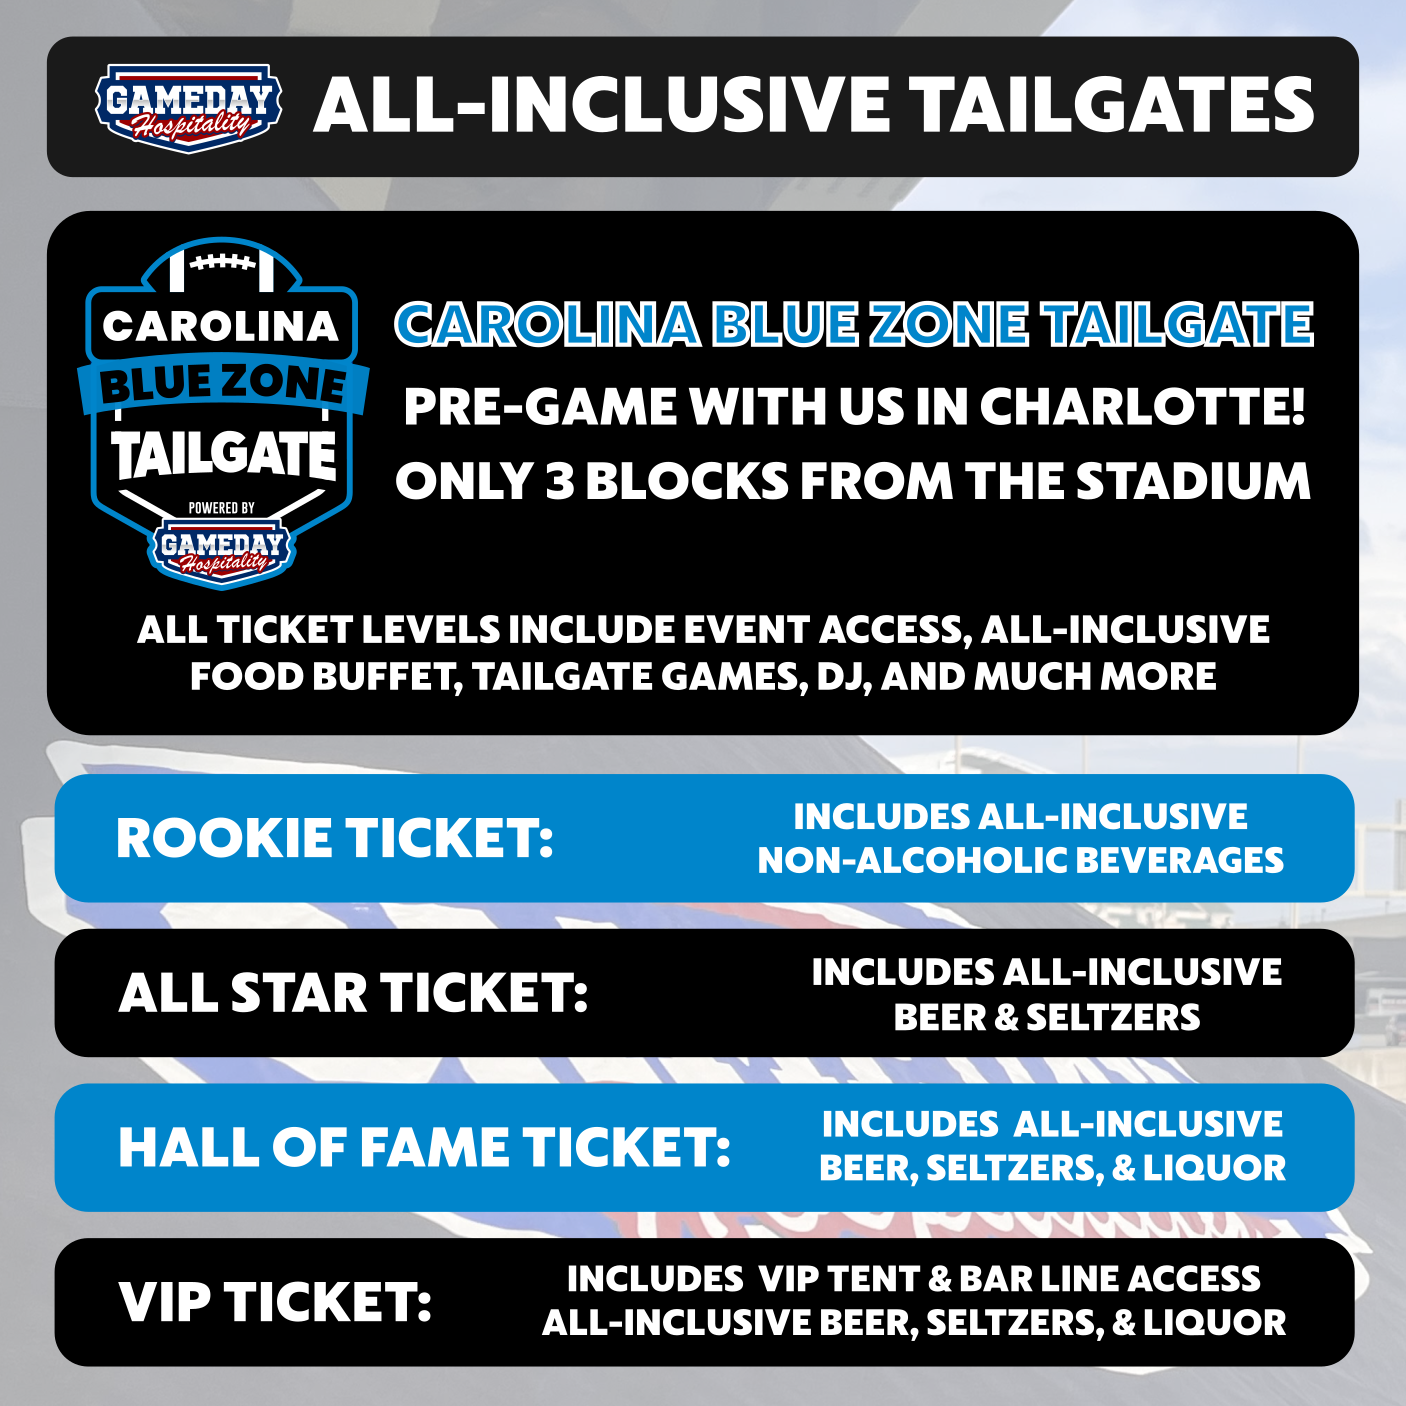 Gameday Hospitality - Charlotte Panthers Tailgate Seating Chart